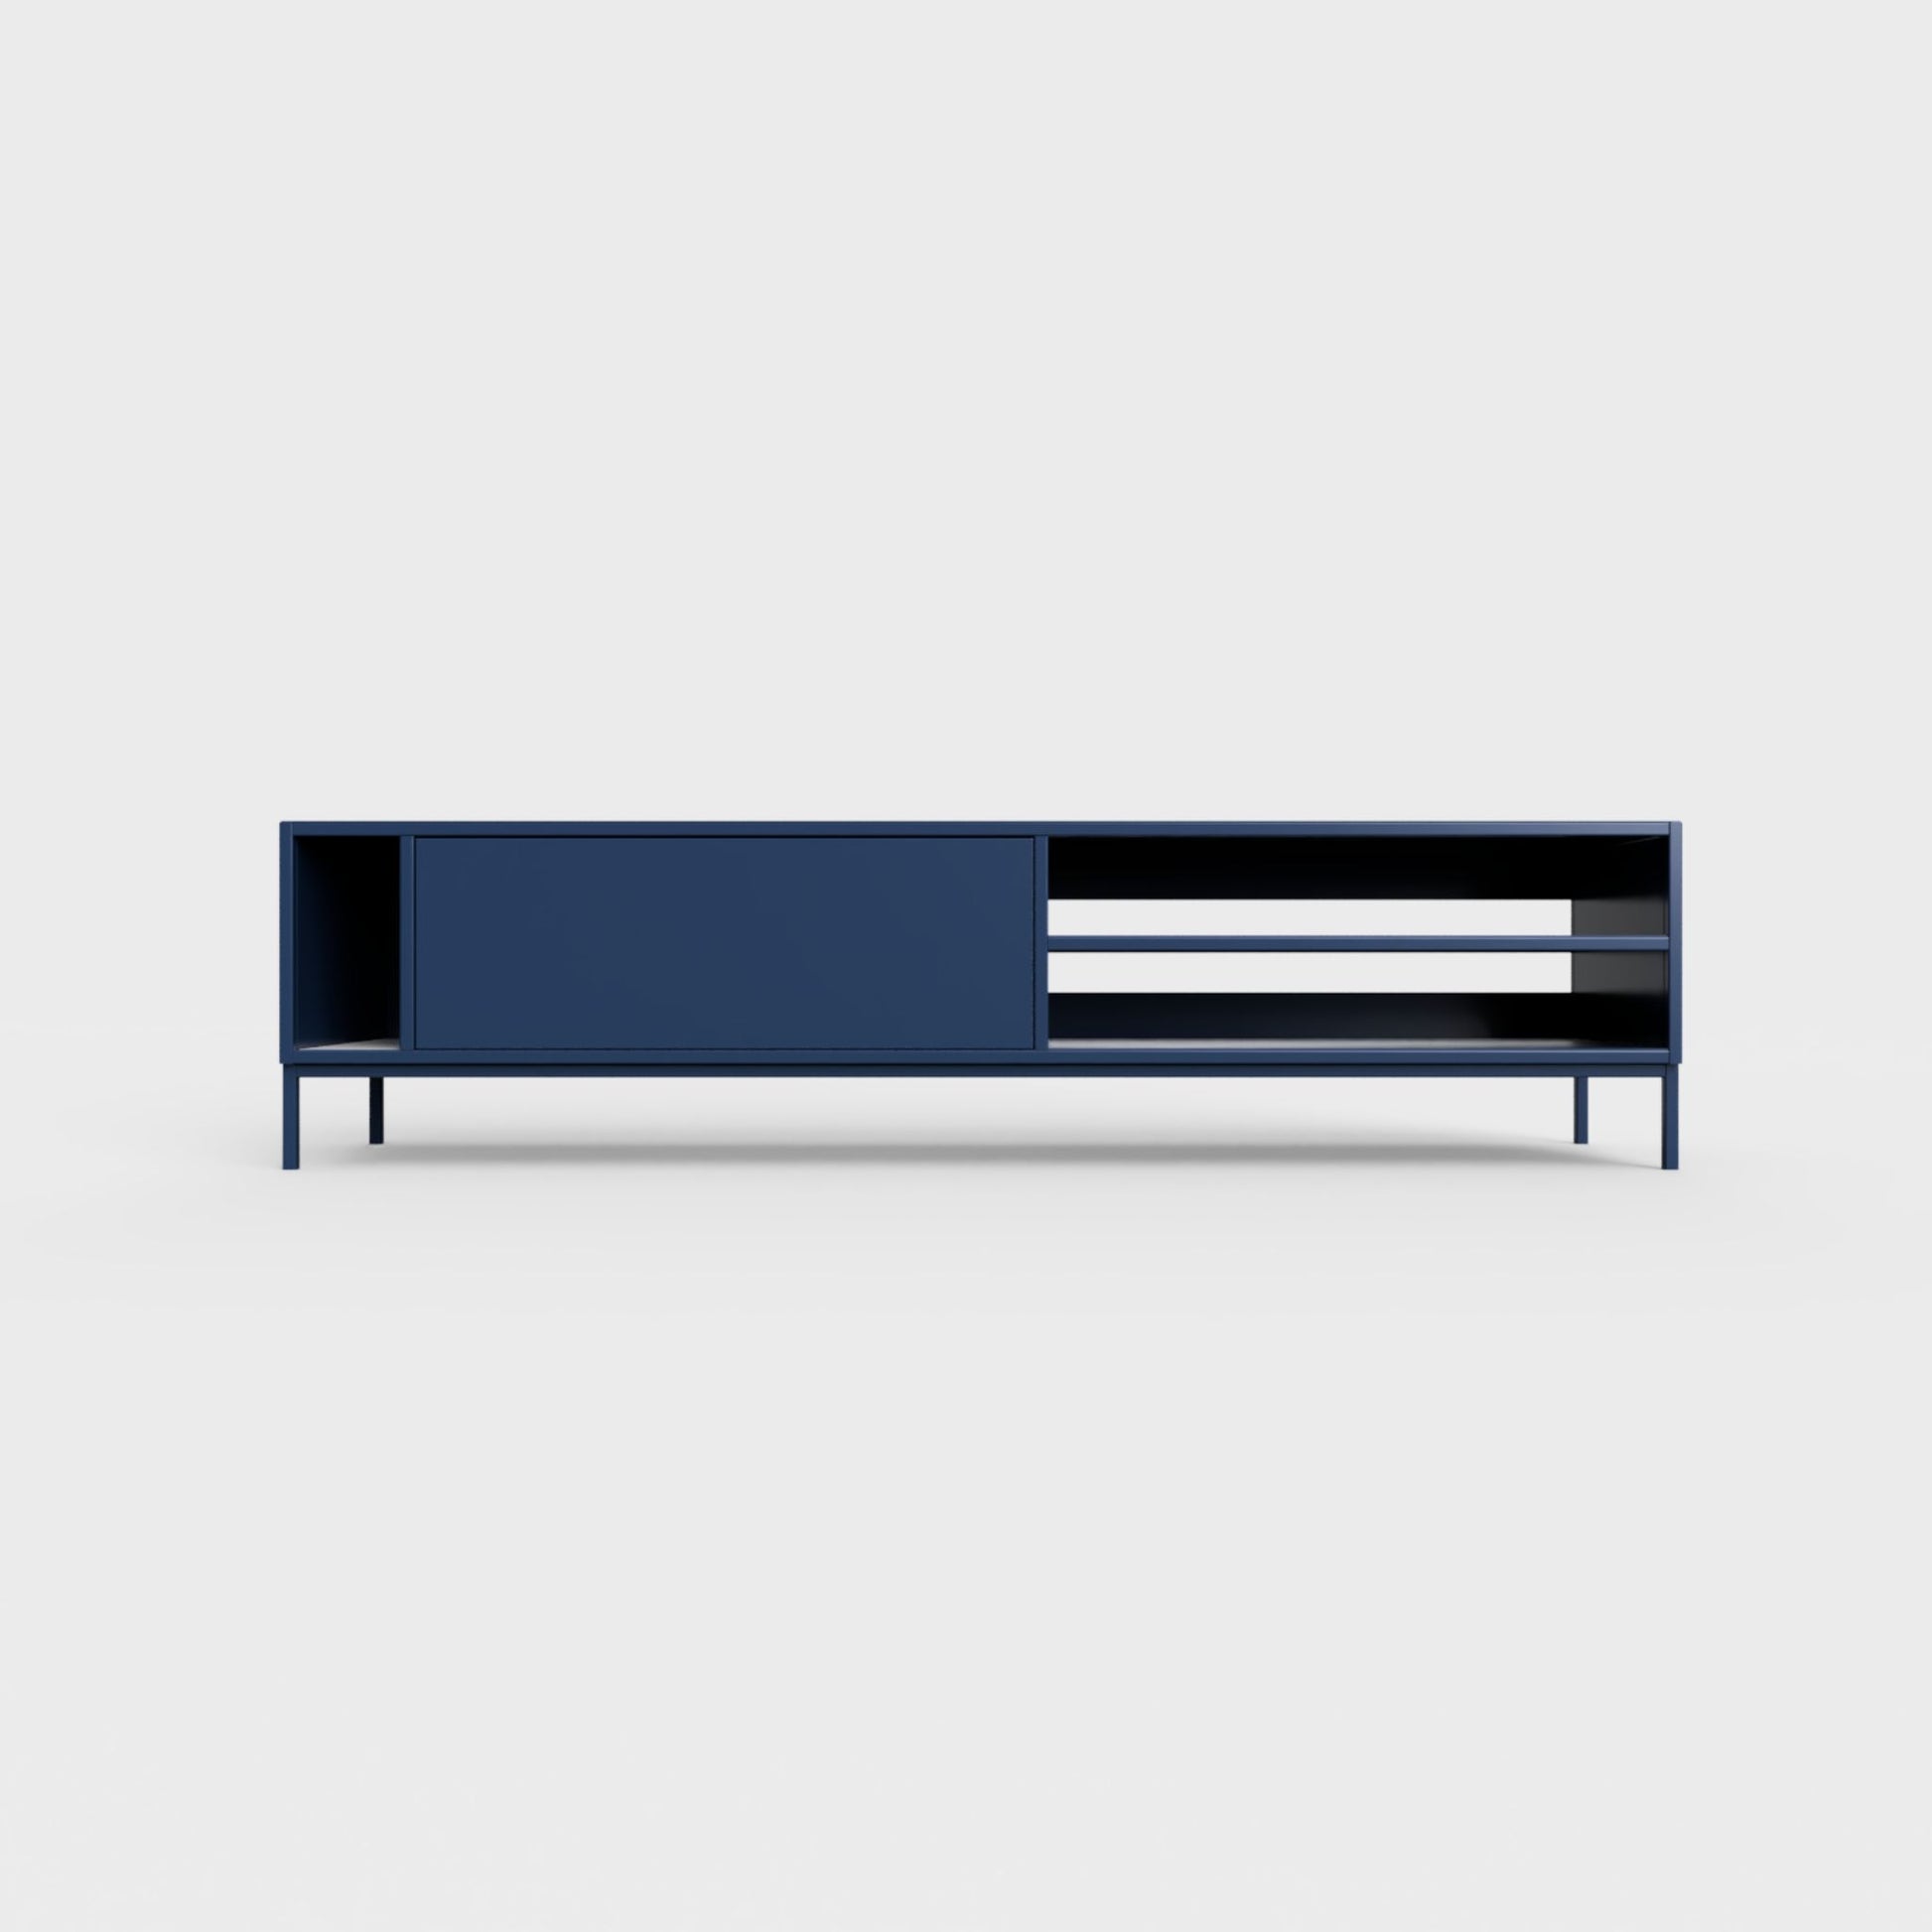 Prunus 03 Lowboard in prussian blue color, powder-coated steel, elegant and modern piece of furniture for your living room